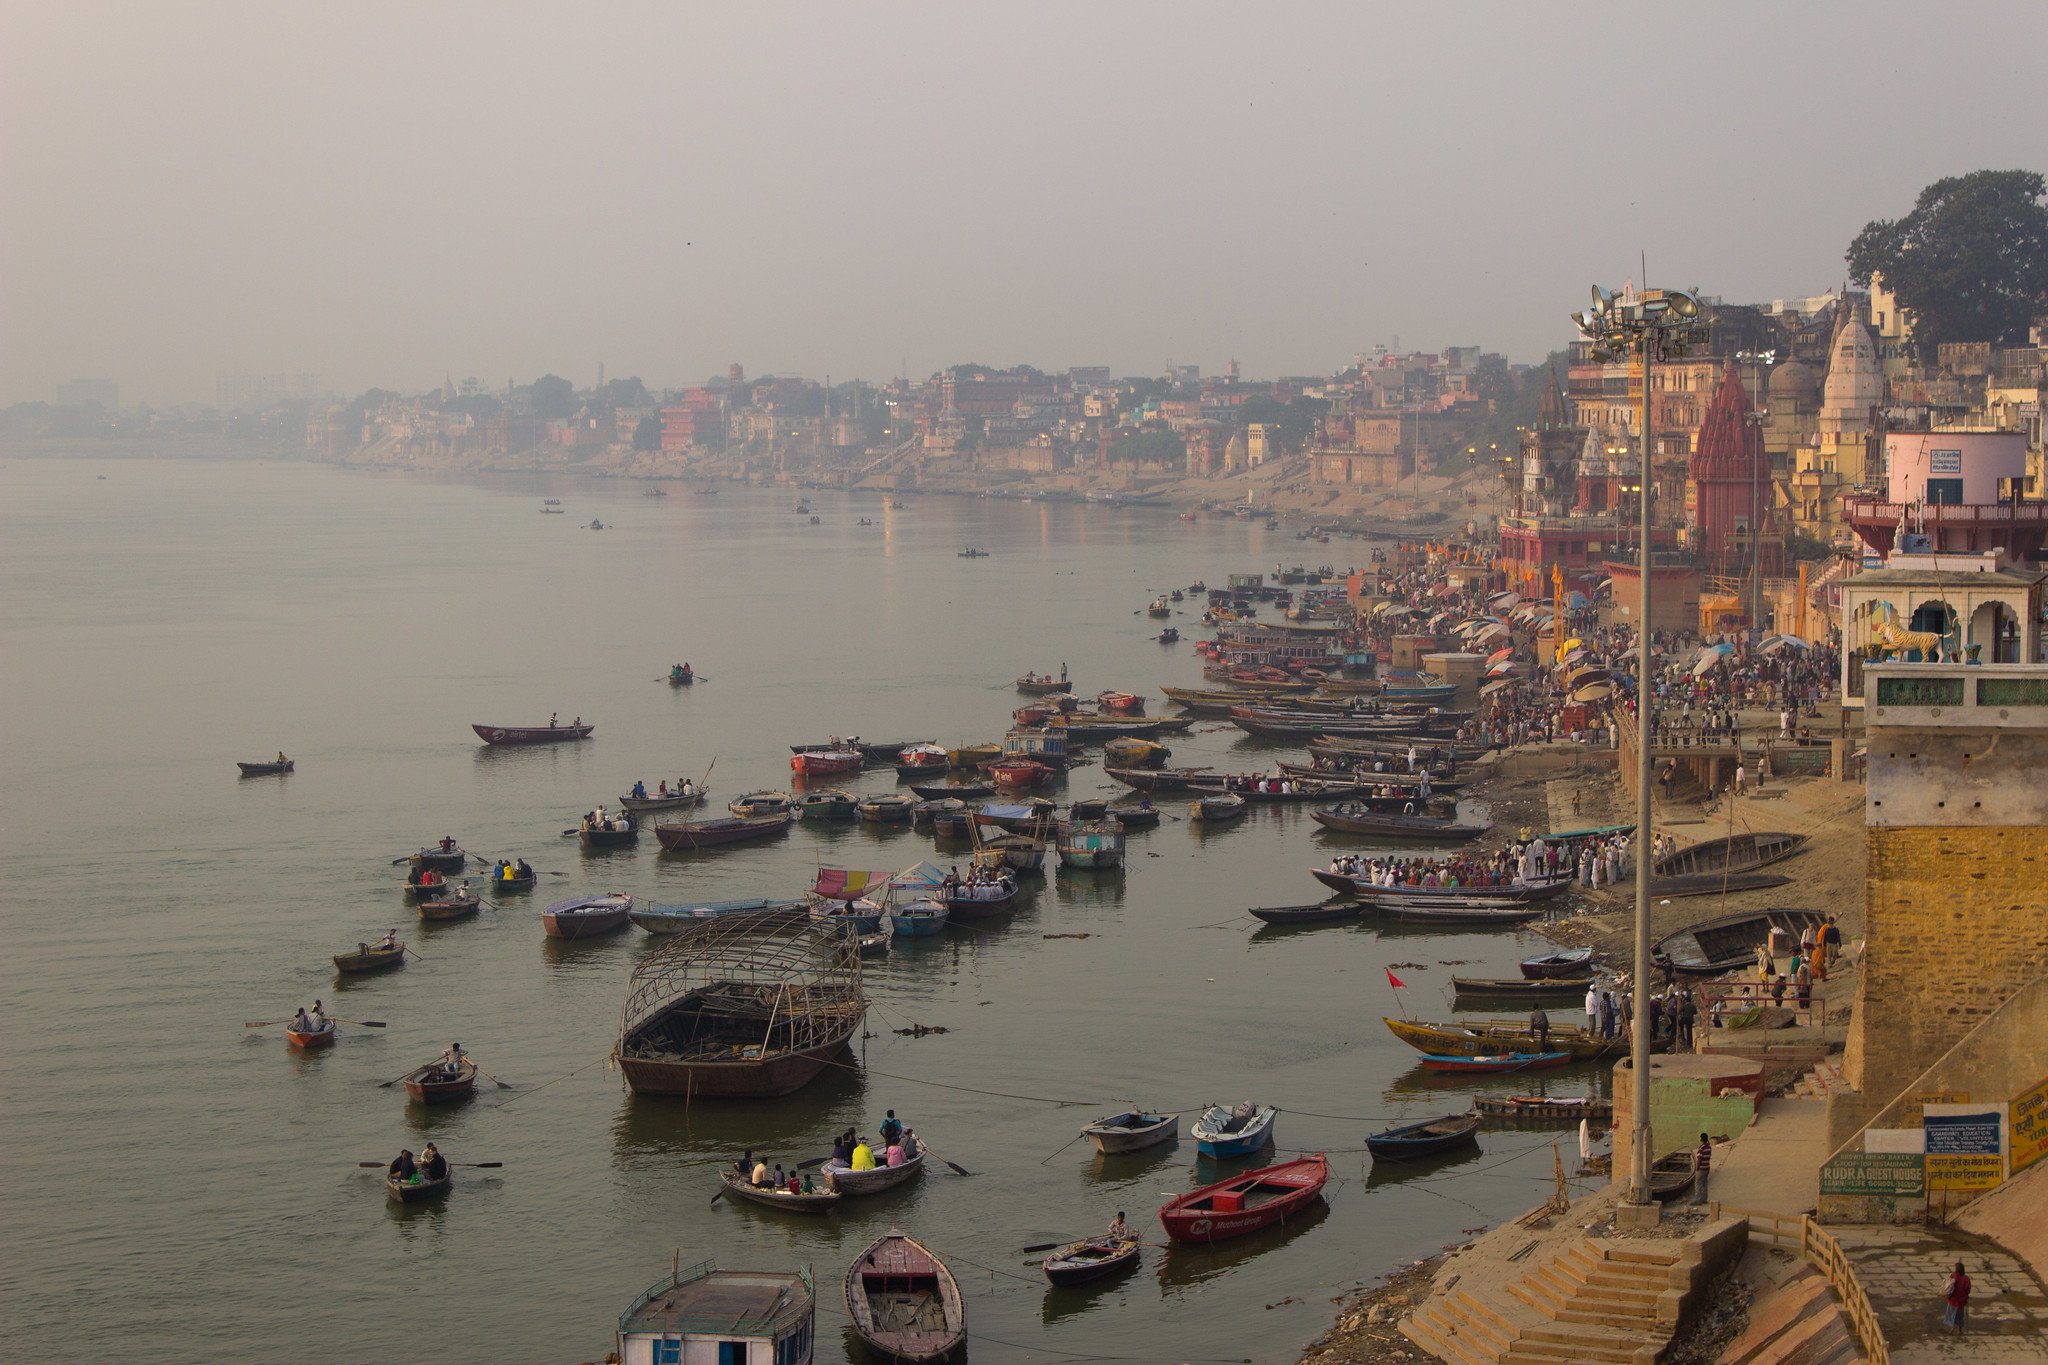 View of the Ganges River from Varanasi